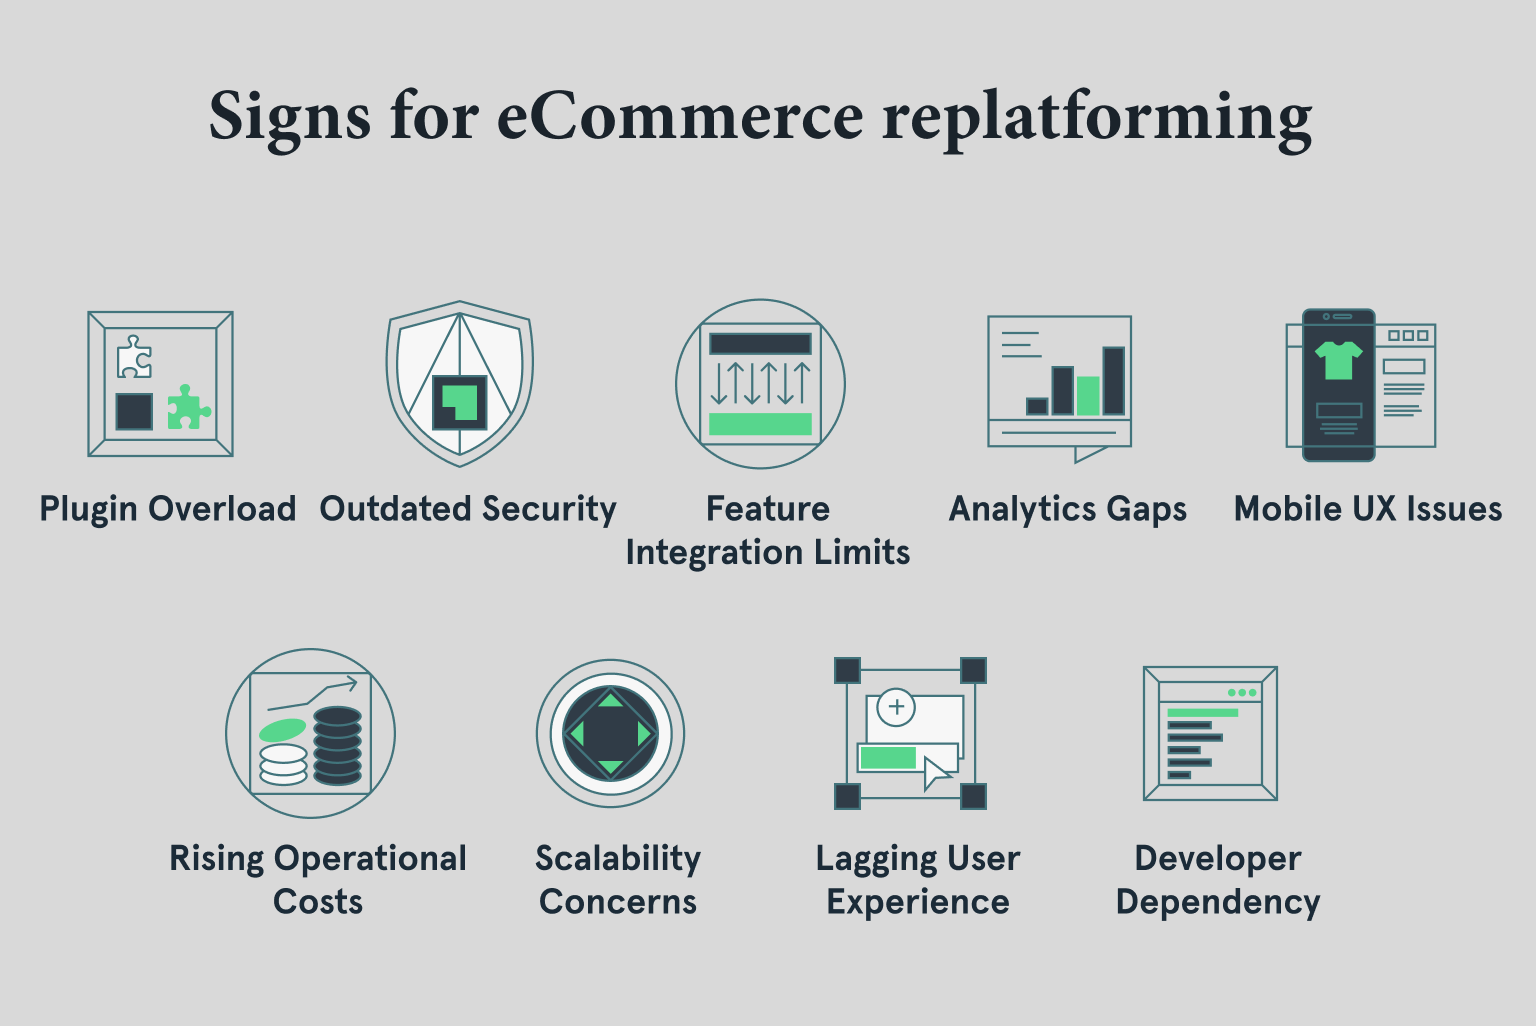 Signs for eCommerce replatforming